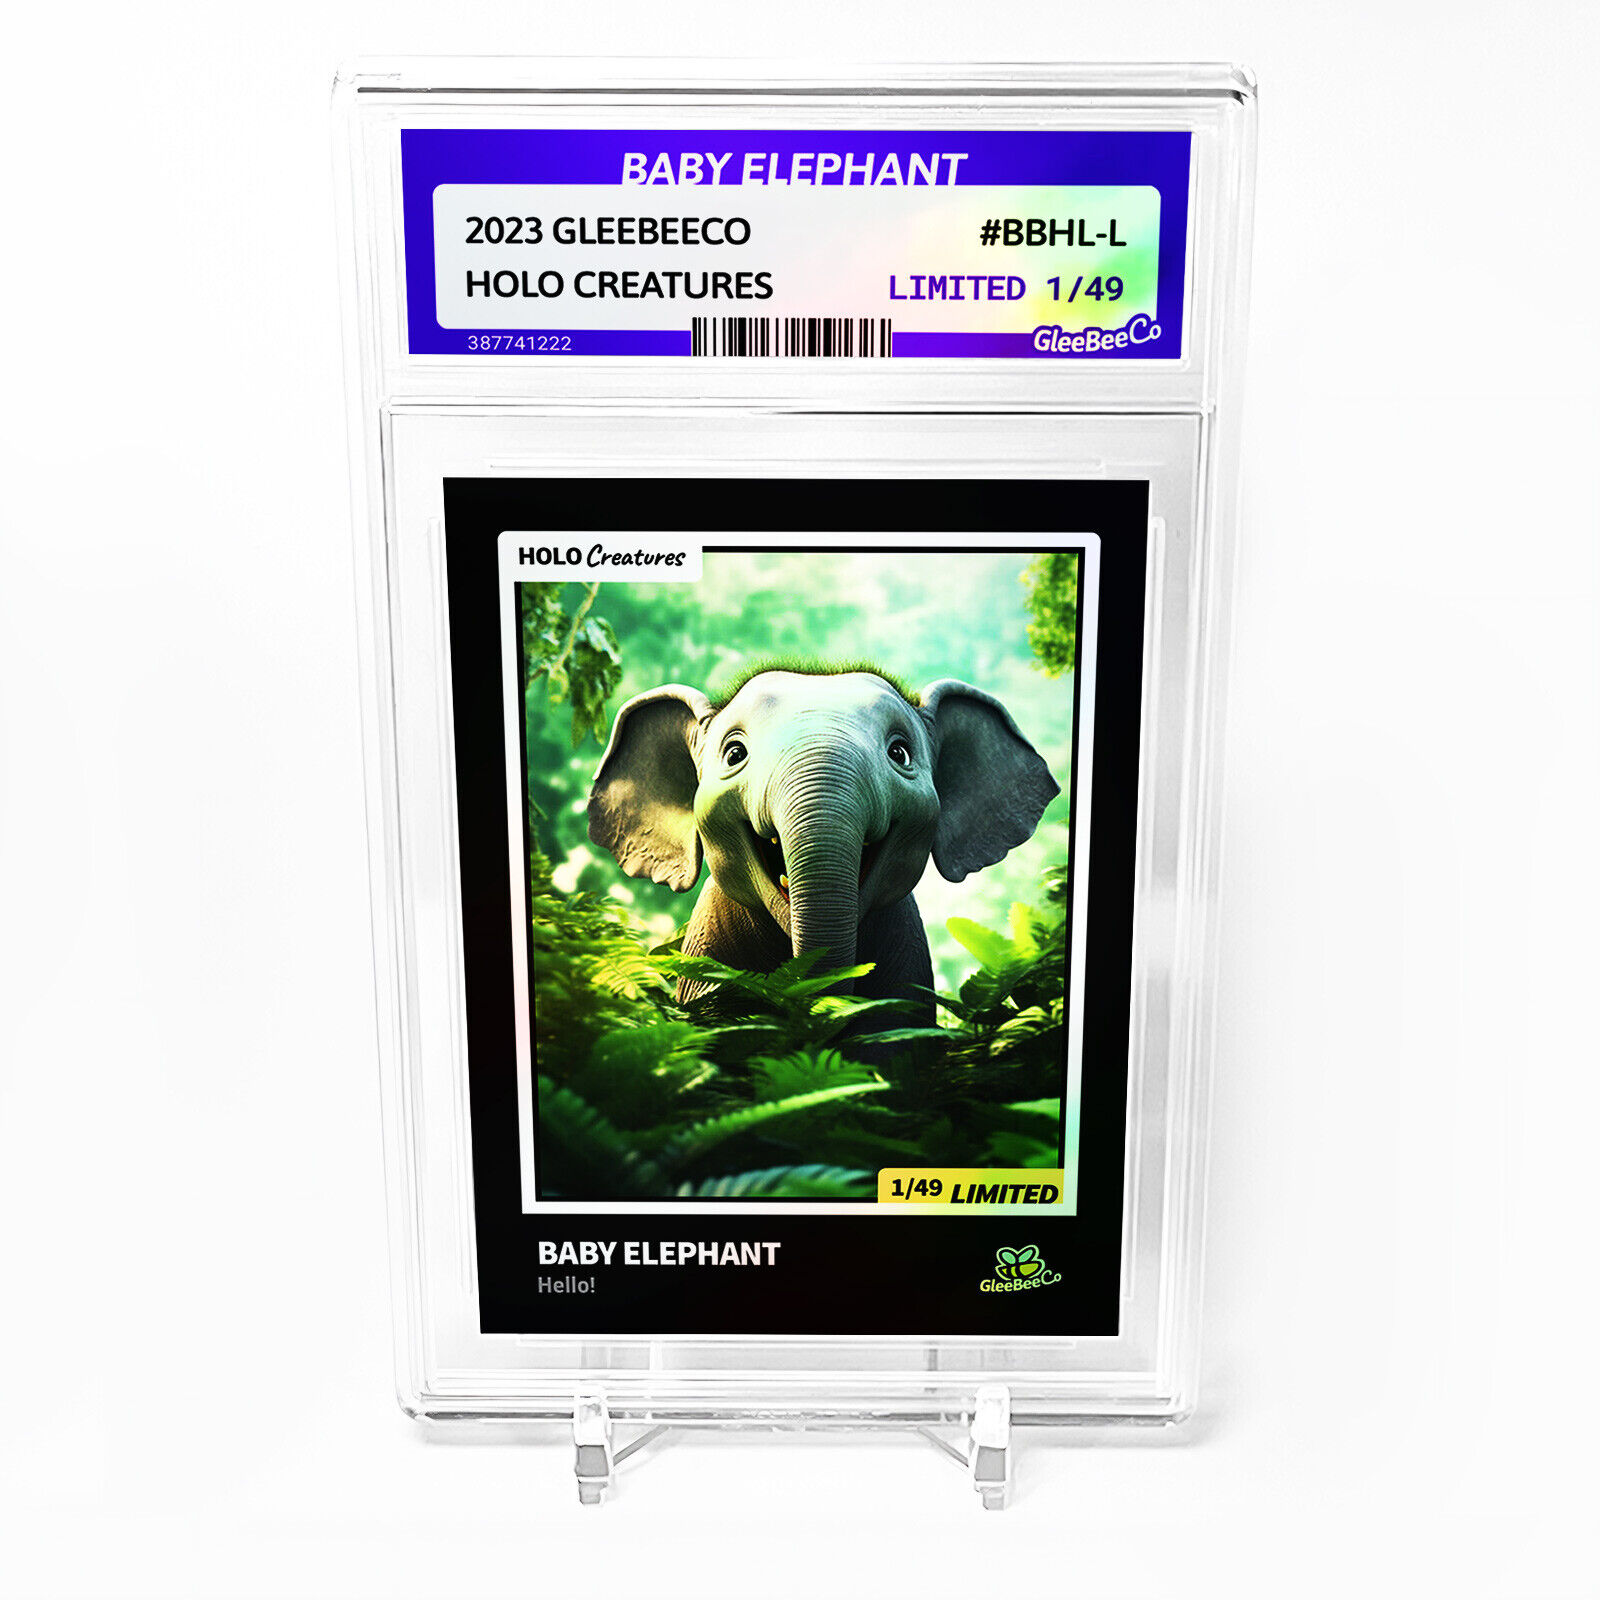 BABY ELEPHANT Art Card 2023 GleeBeeCo Holo Creatures Slabbed #BBHL-L Only /49